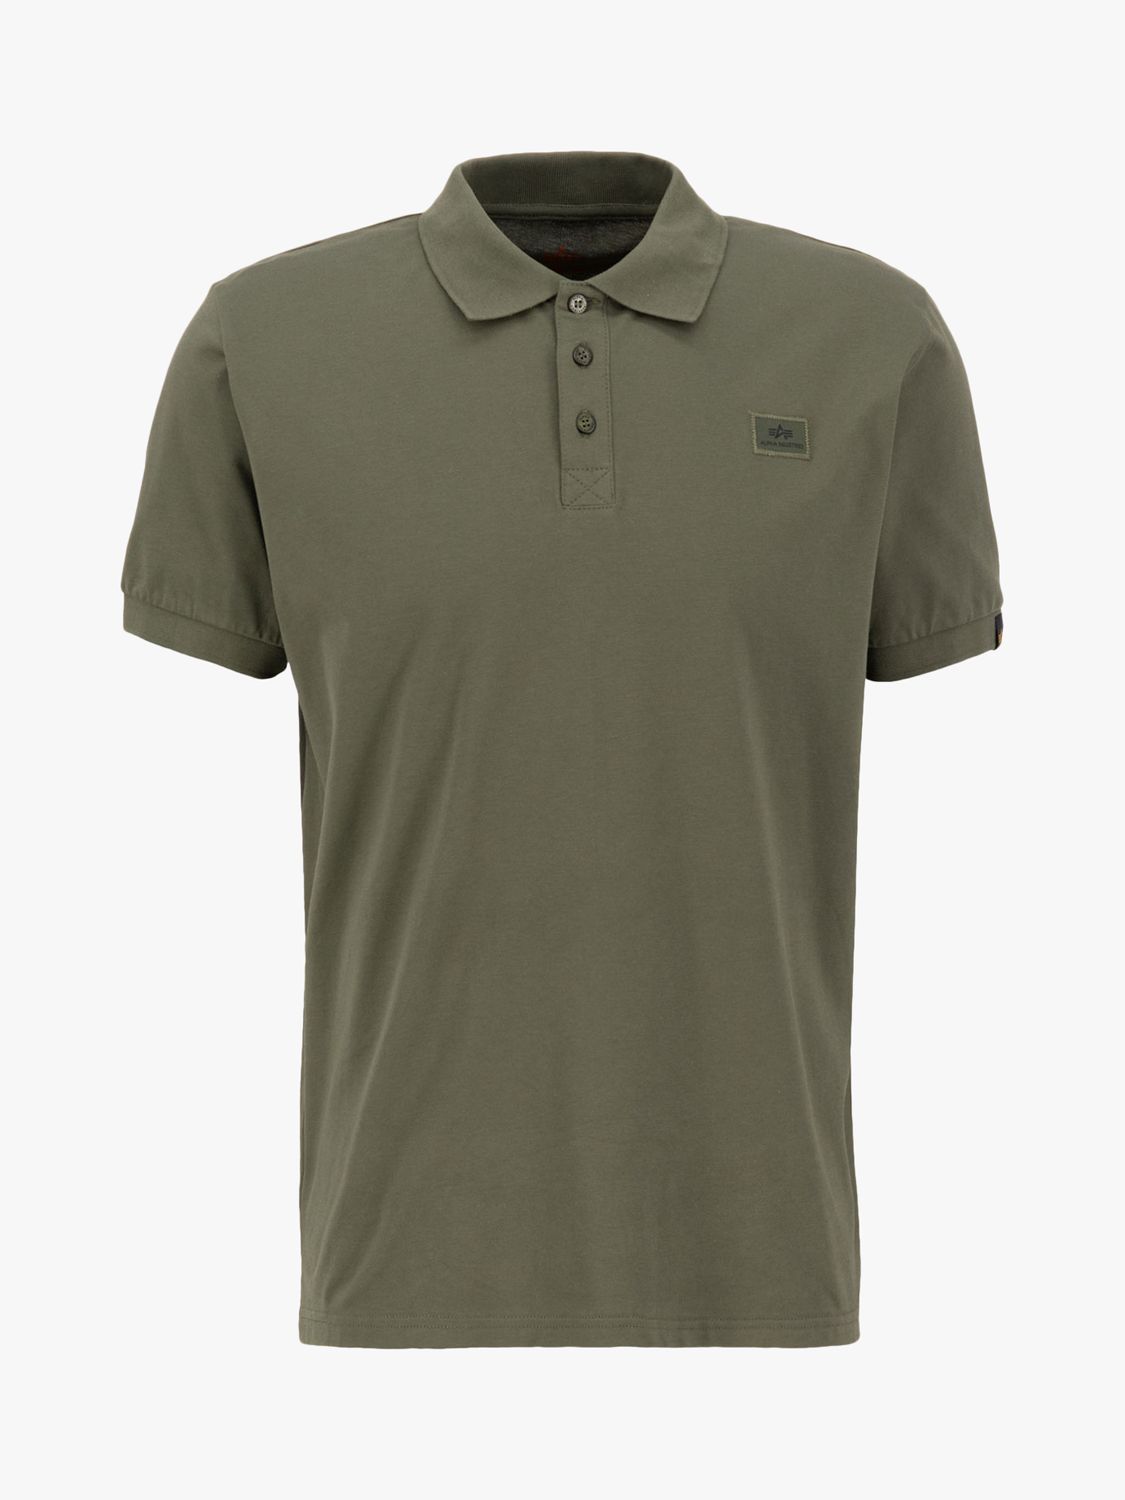 Green John Dark Industries Partners Lewis Polo, X-Fit at Alpha &